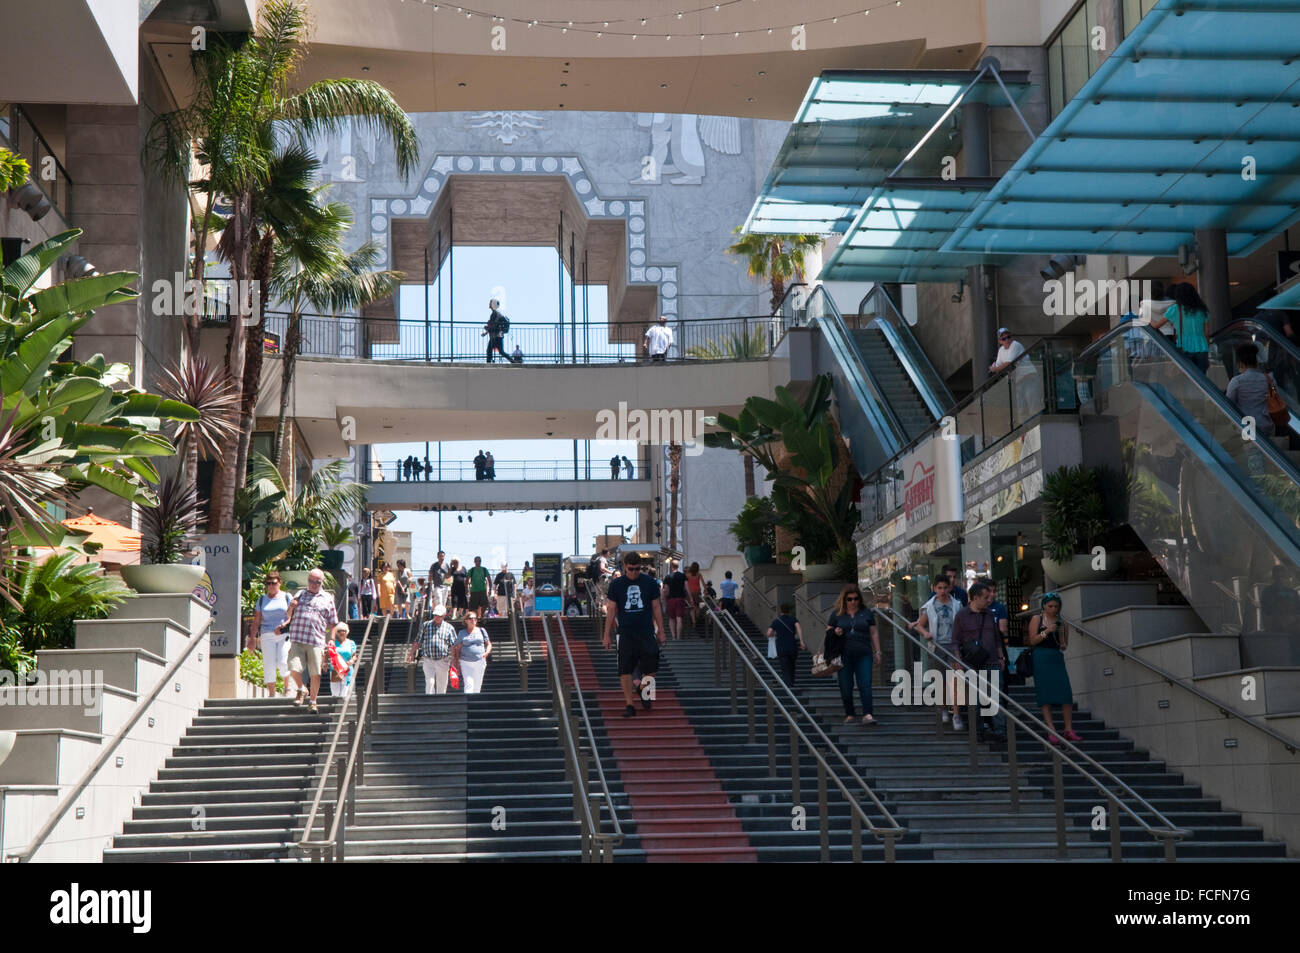 Shoppers and tourists on stairs at the Hollywood & Highland Center in Los Angeles Stock Photo